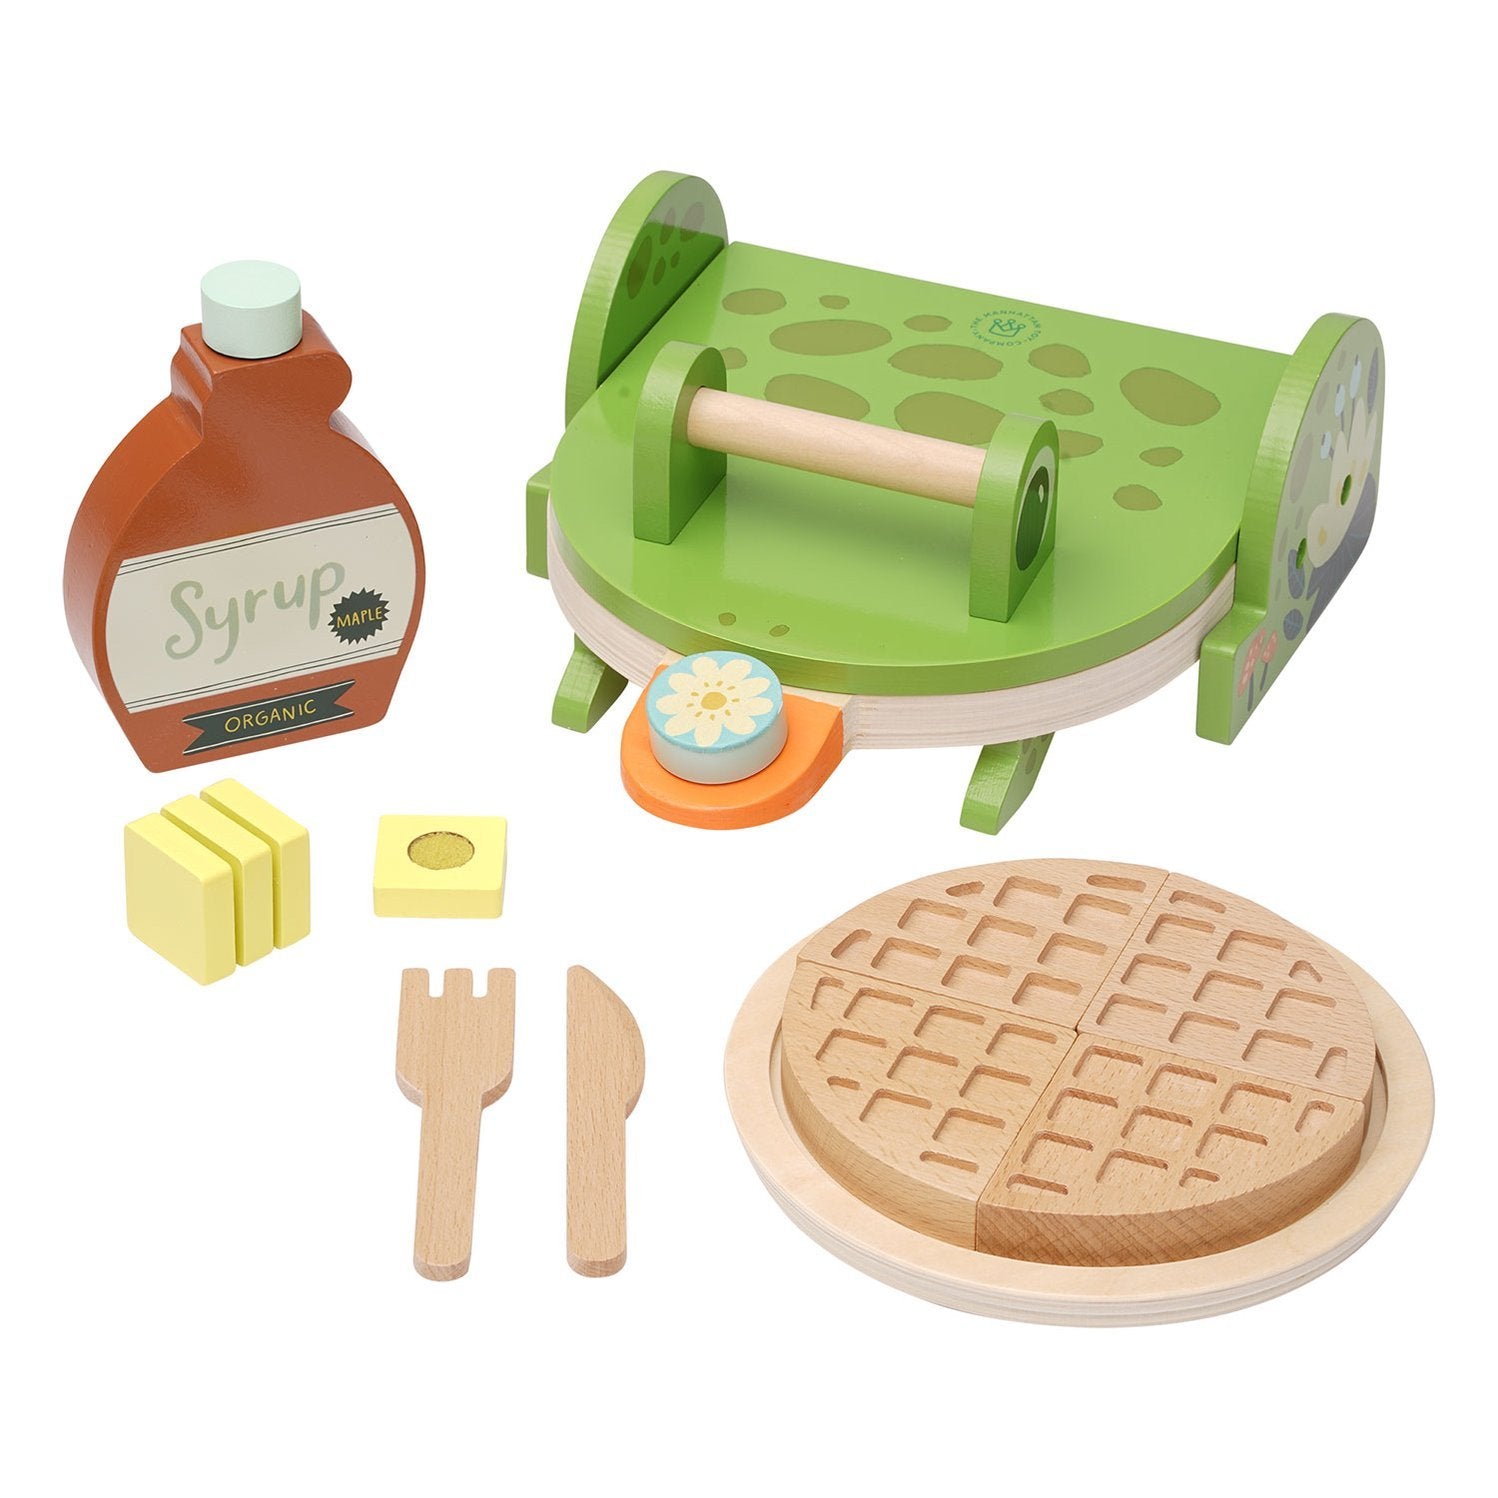 Ribbit Waffle Maker by Manhattan Toy - Wood Wood Toys Canada's Favourite Montessori Toy Store